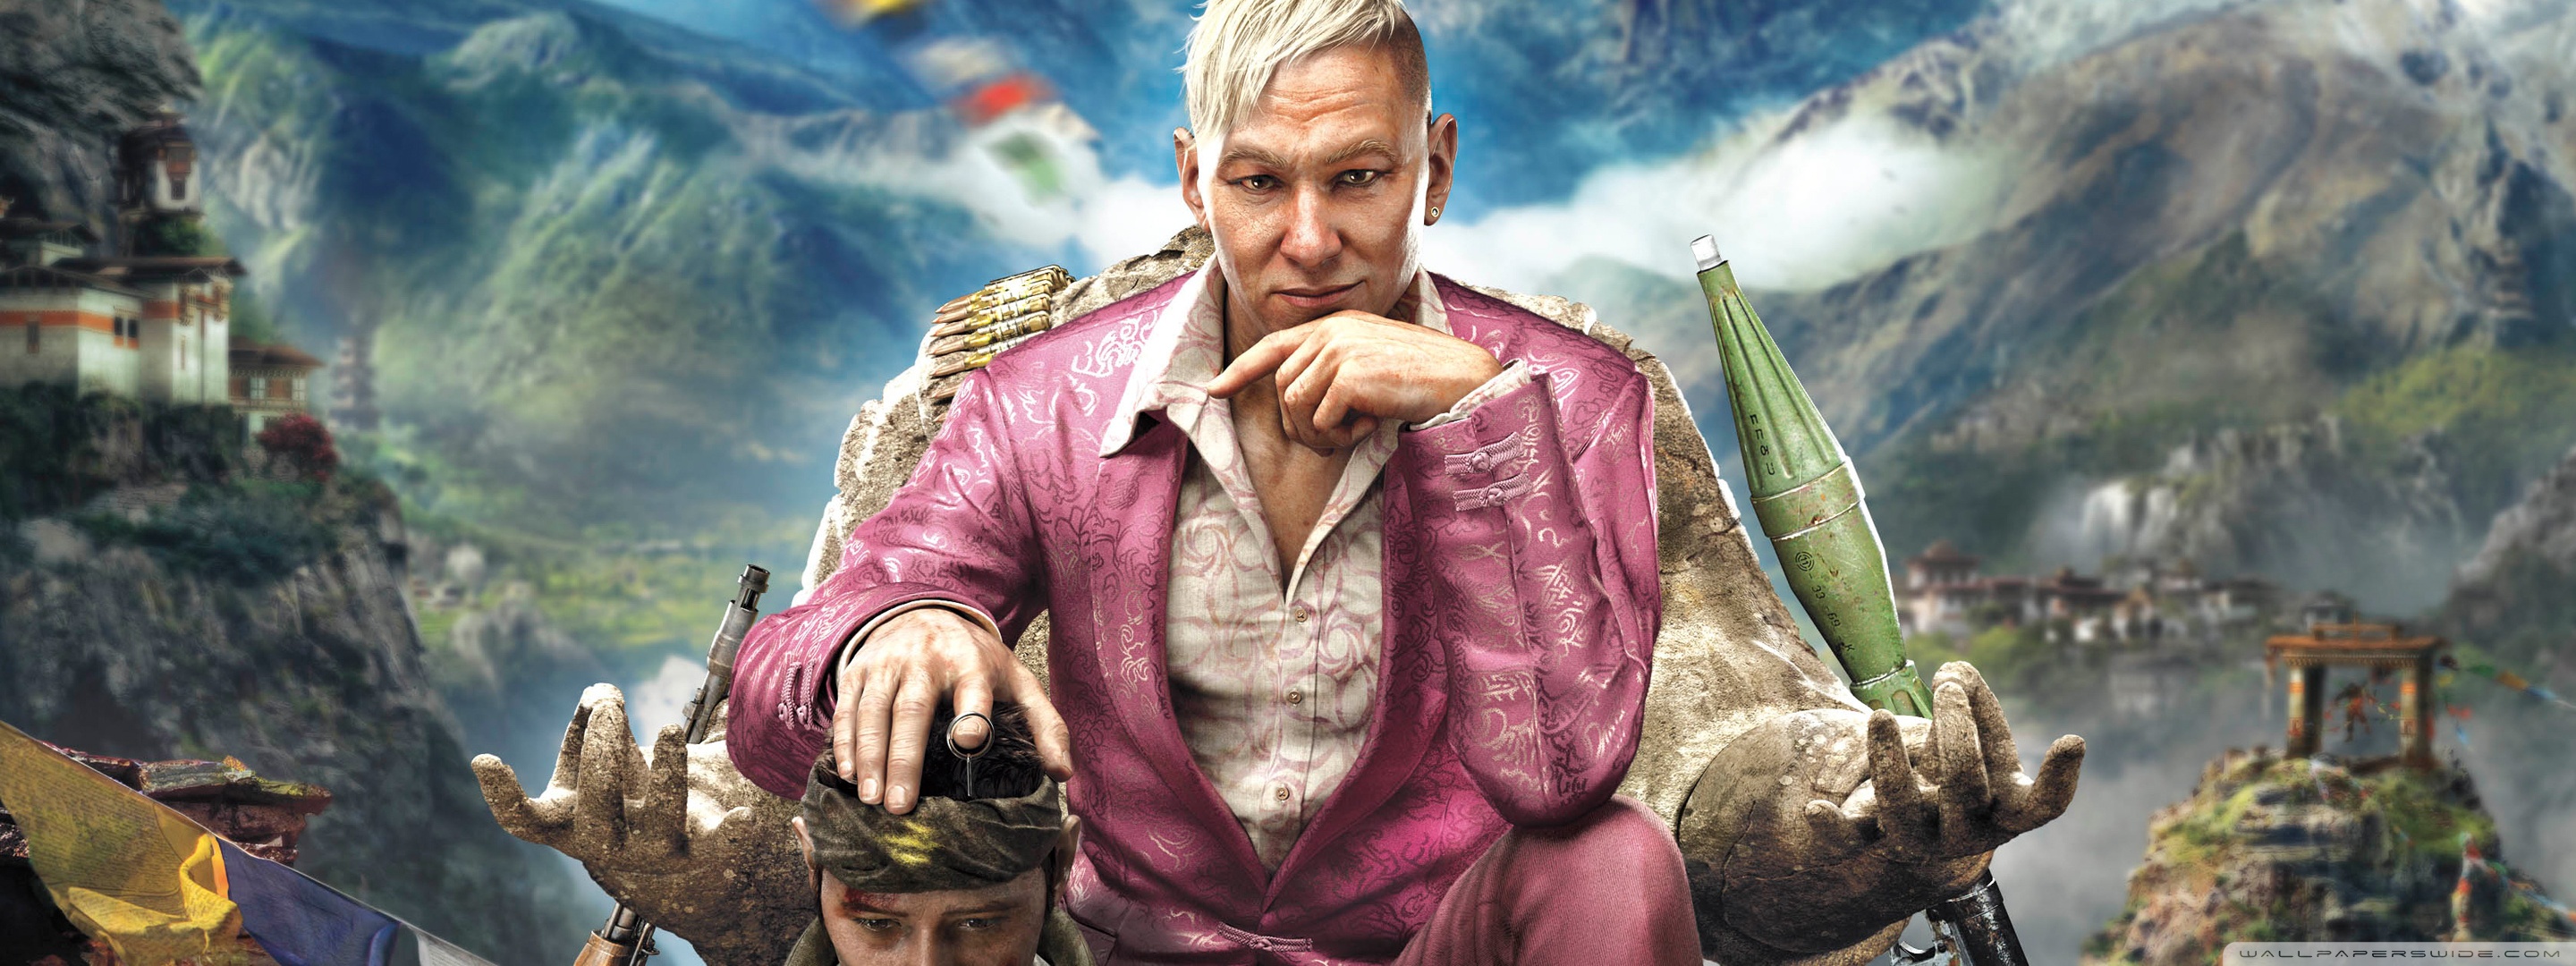 Far Cry 4 Ultimate Wallpaper - Wallpapers | DesiComments.com